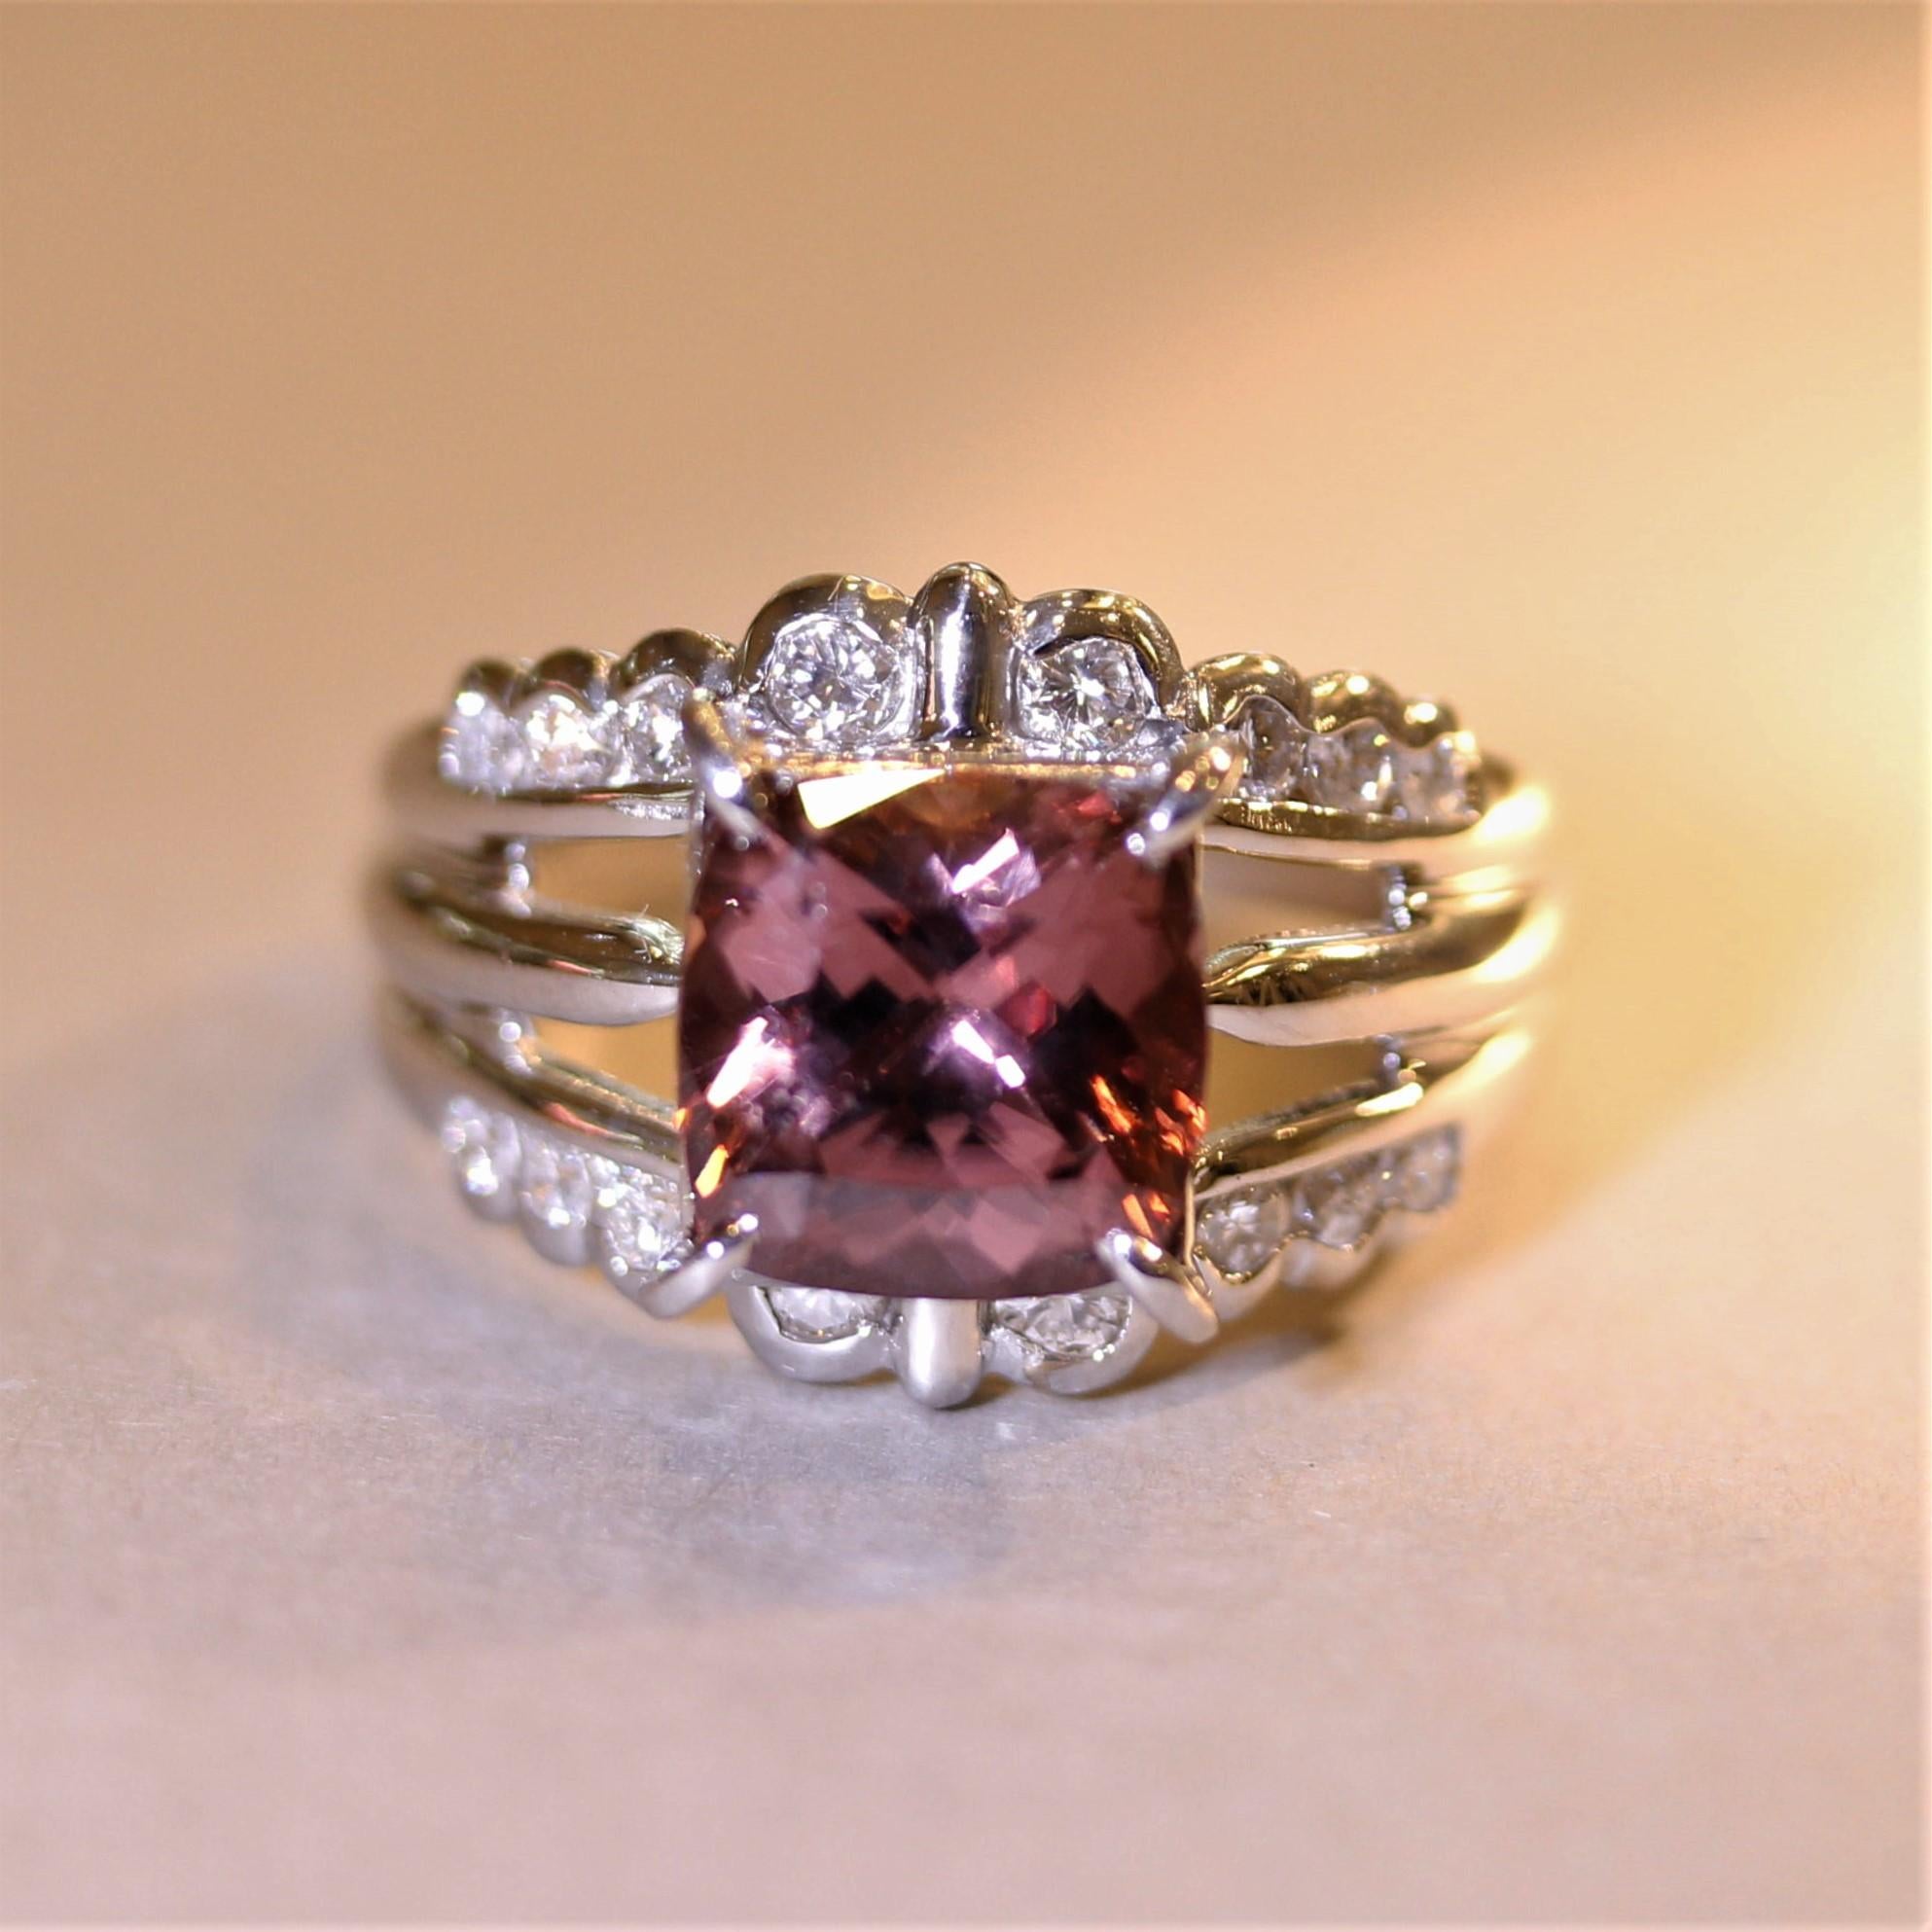 A sweet ring featuring a 5.21 carat square-shaped zircon. It has a unique orangy-pink color with excellent brilliance. Zircon has a similar amount of brilliance and sparkle as diamond! It is accented by 0.51 carats of round brilliant-cut diamonds